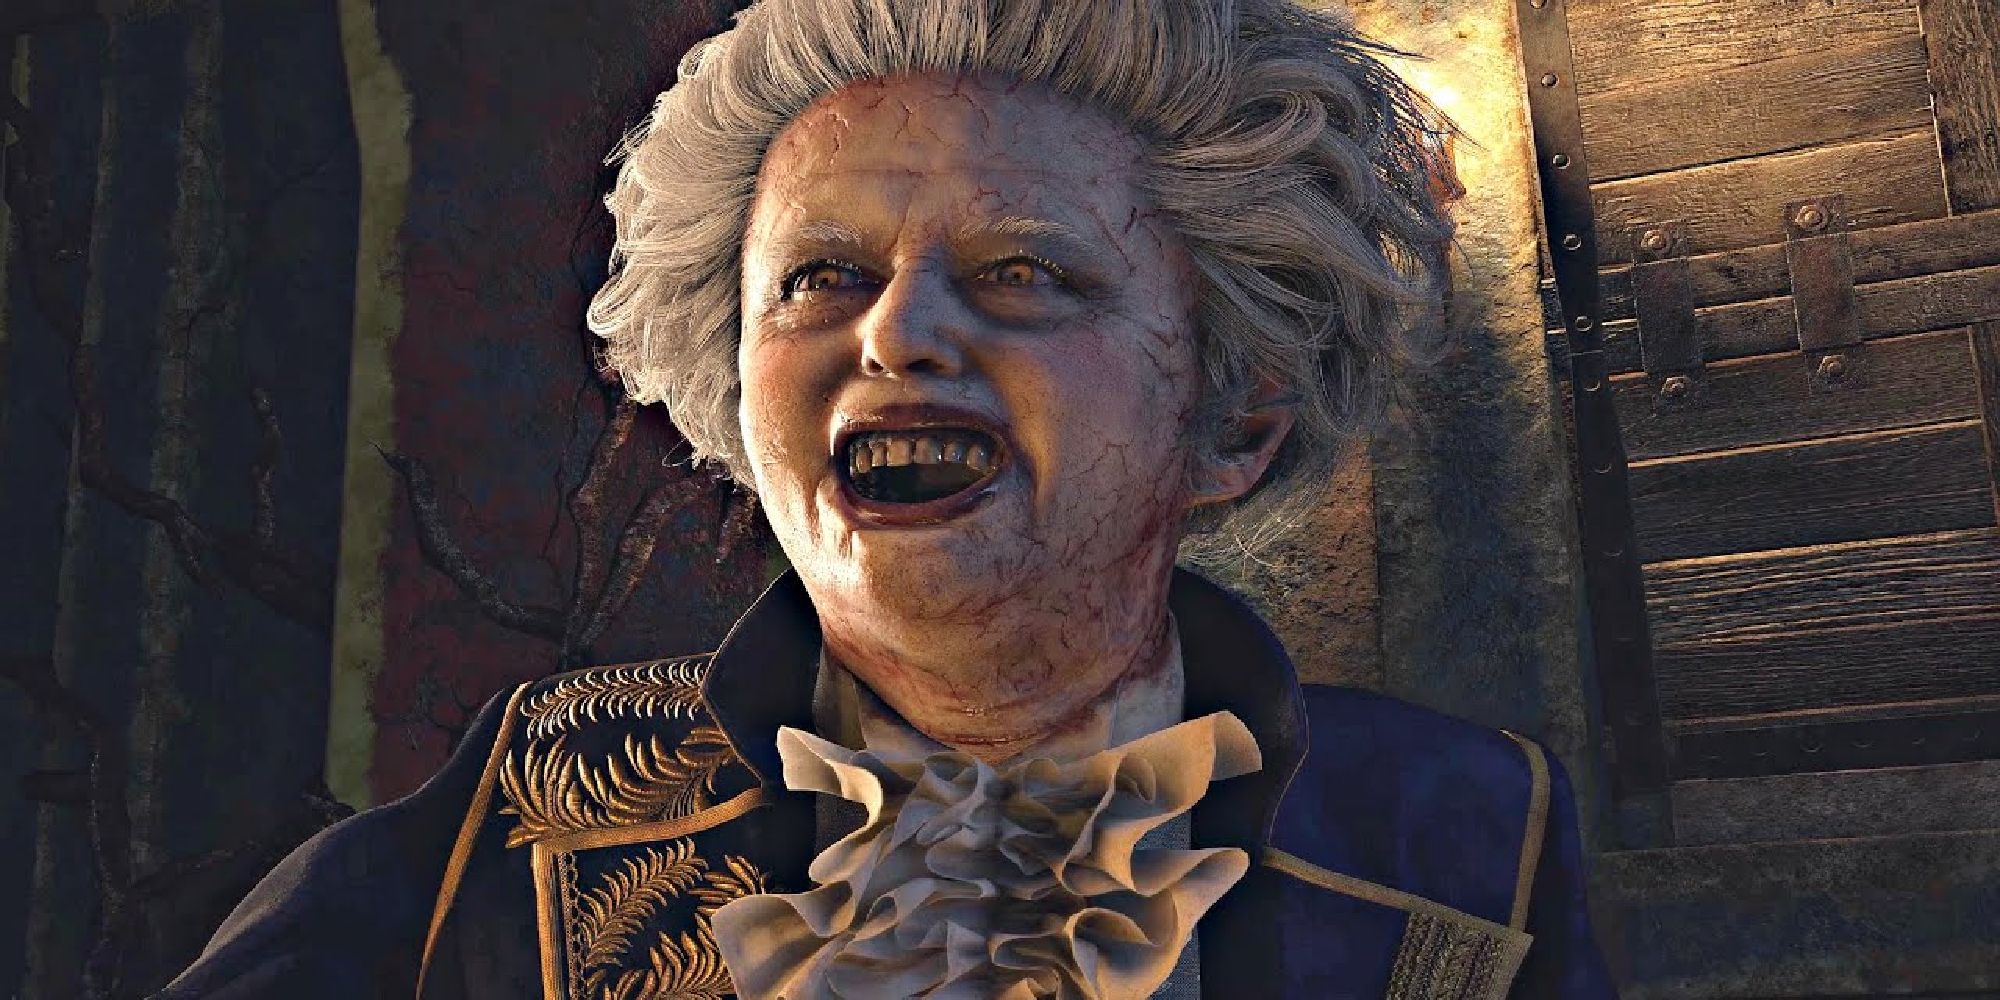 Roman from the remake of Resident Evil 4, his mouth spread in a toothy grin. 